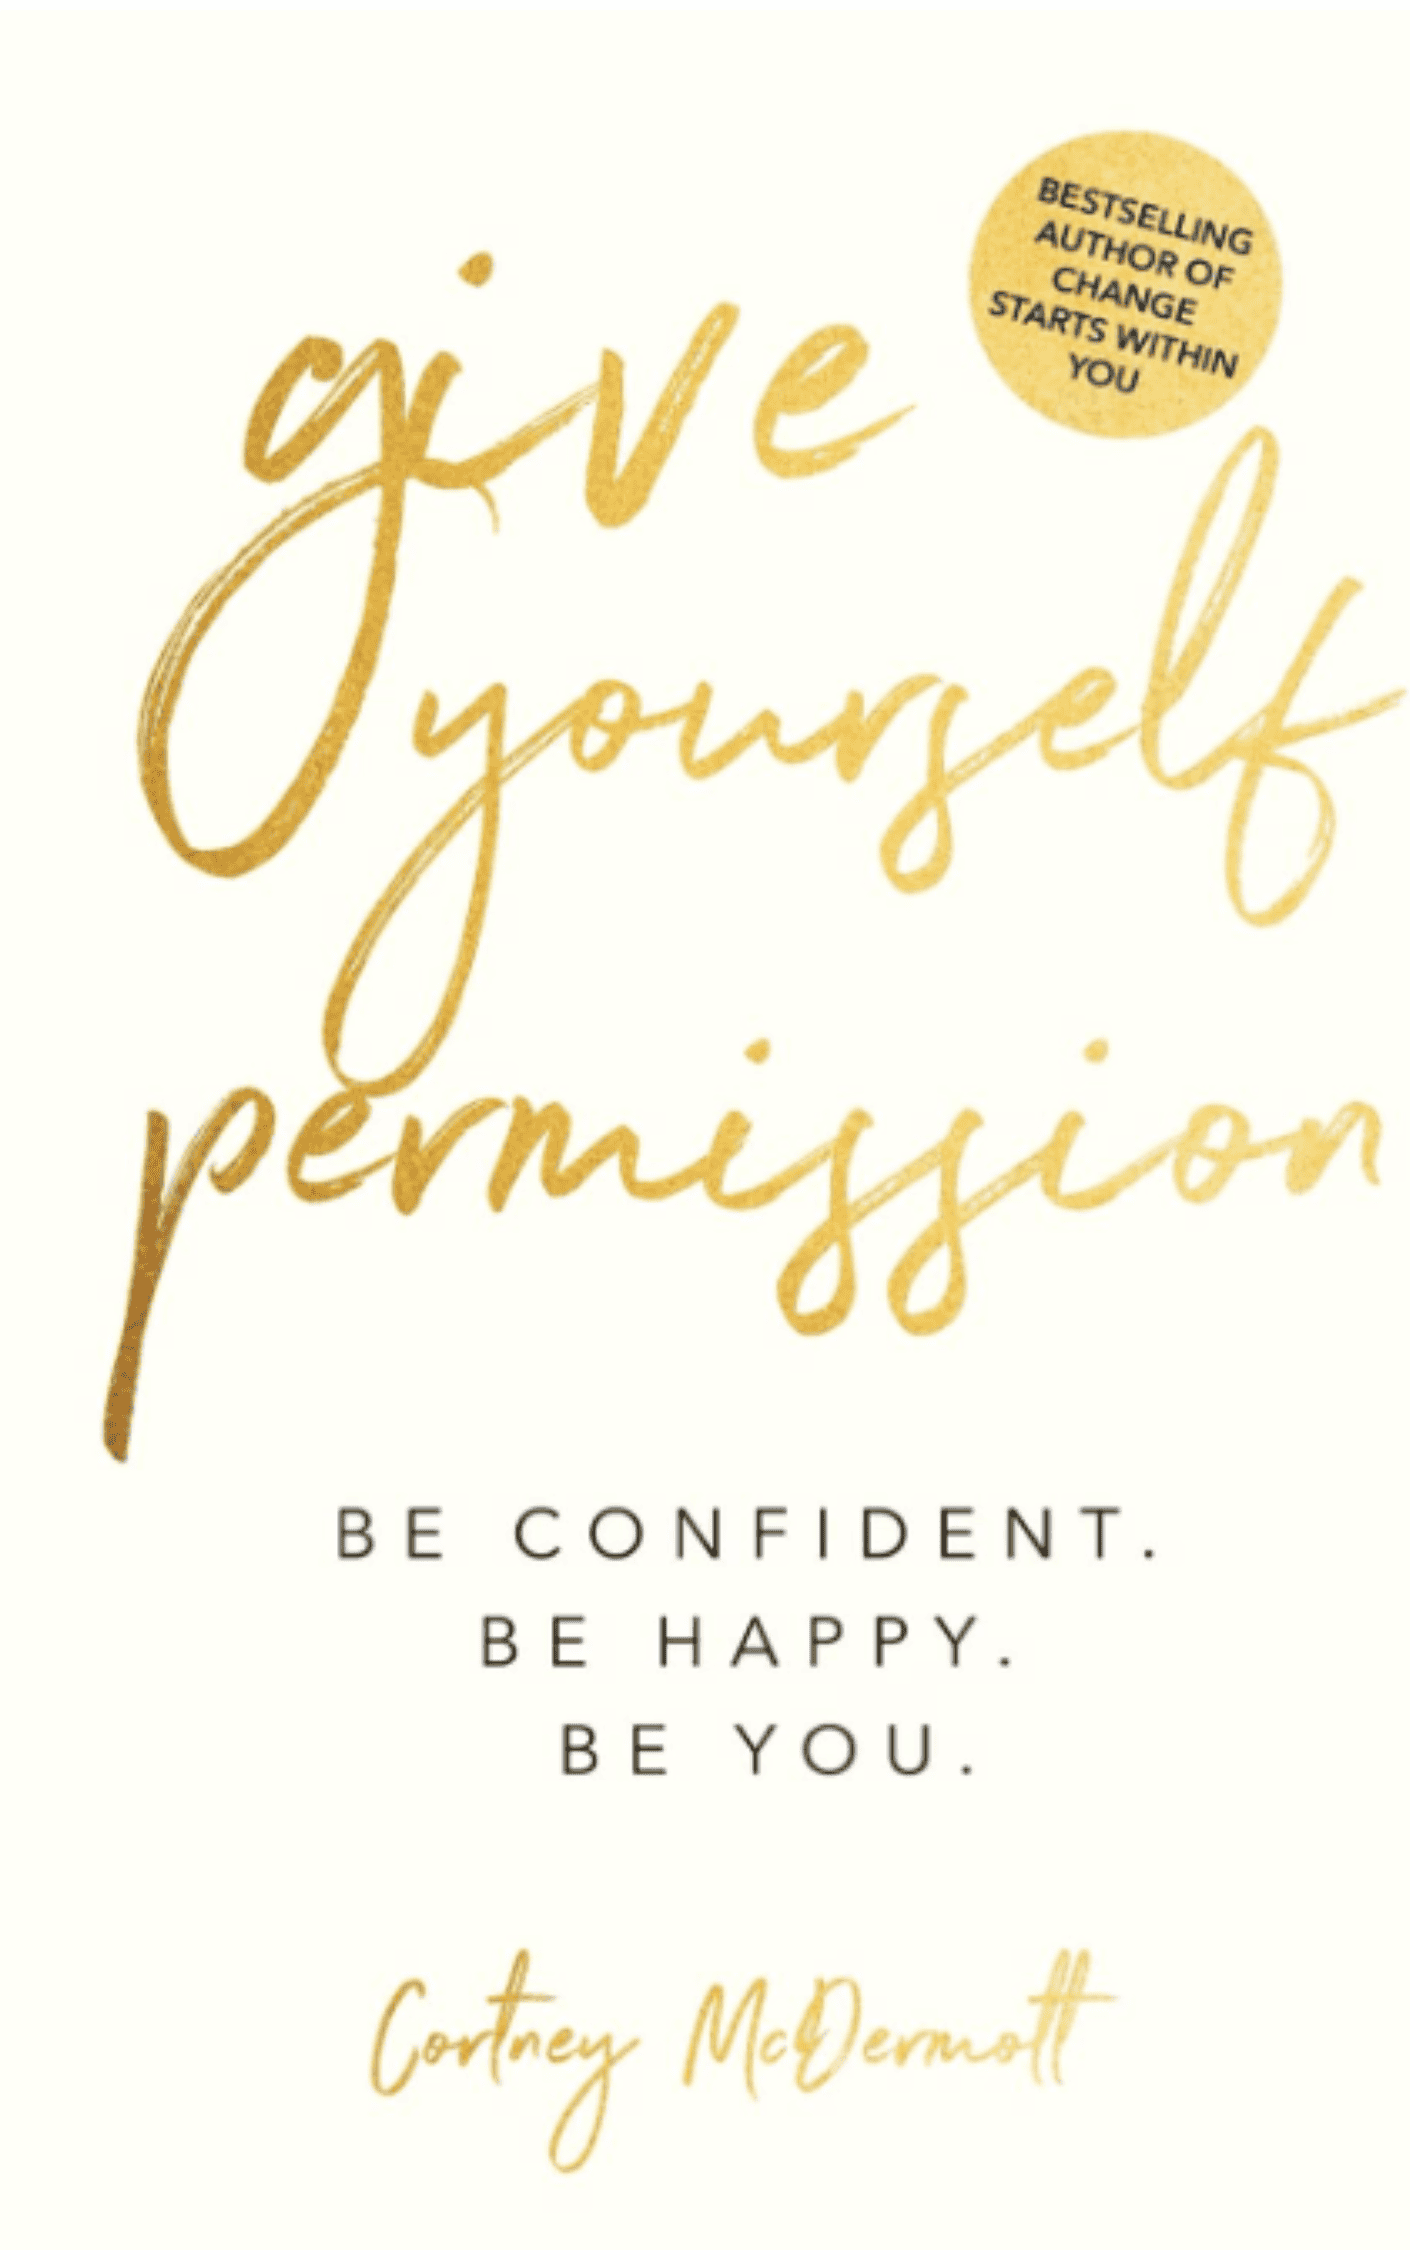 Gold text stating "Give-Yourself-Permission-Book" at the top, with the phrases "be confident. be happy." in black text at the bottom, signed "Cortney McDermott